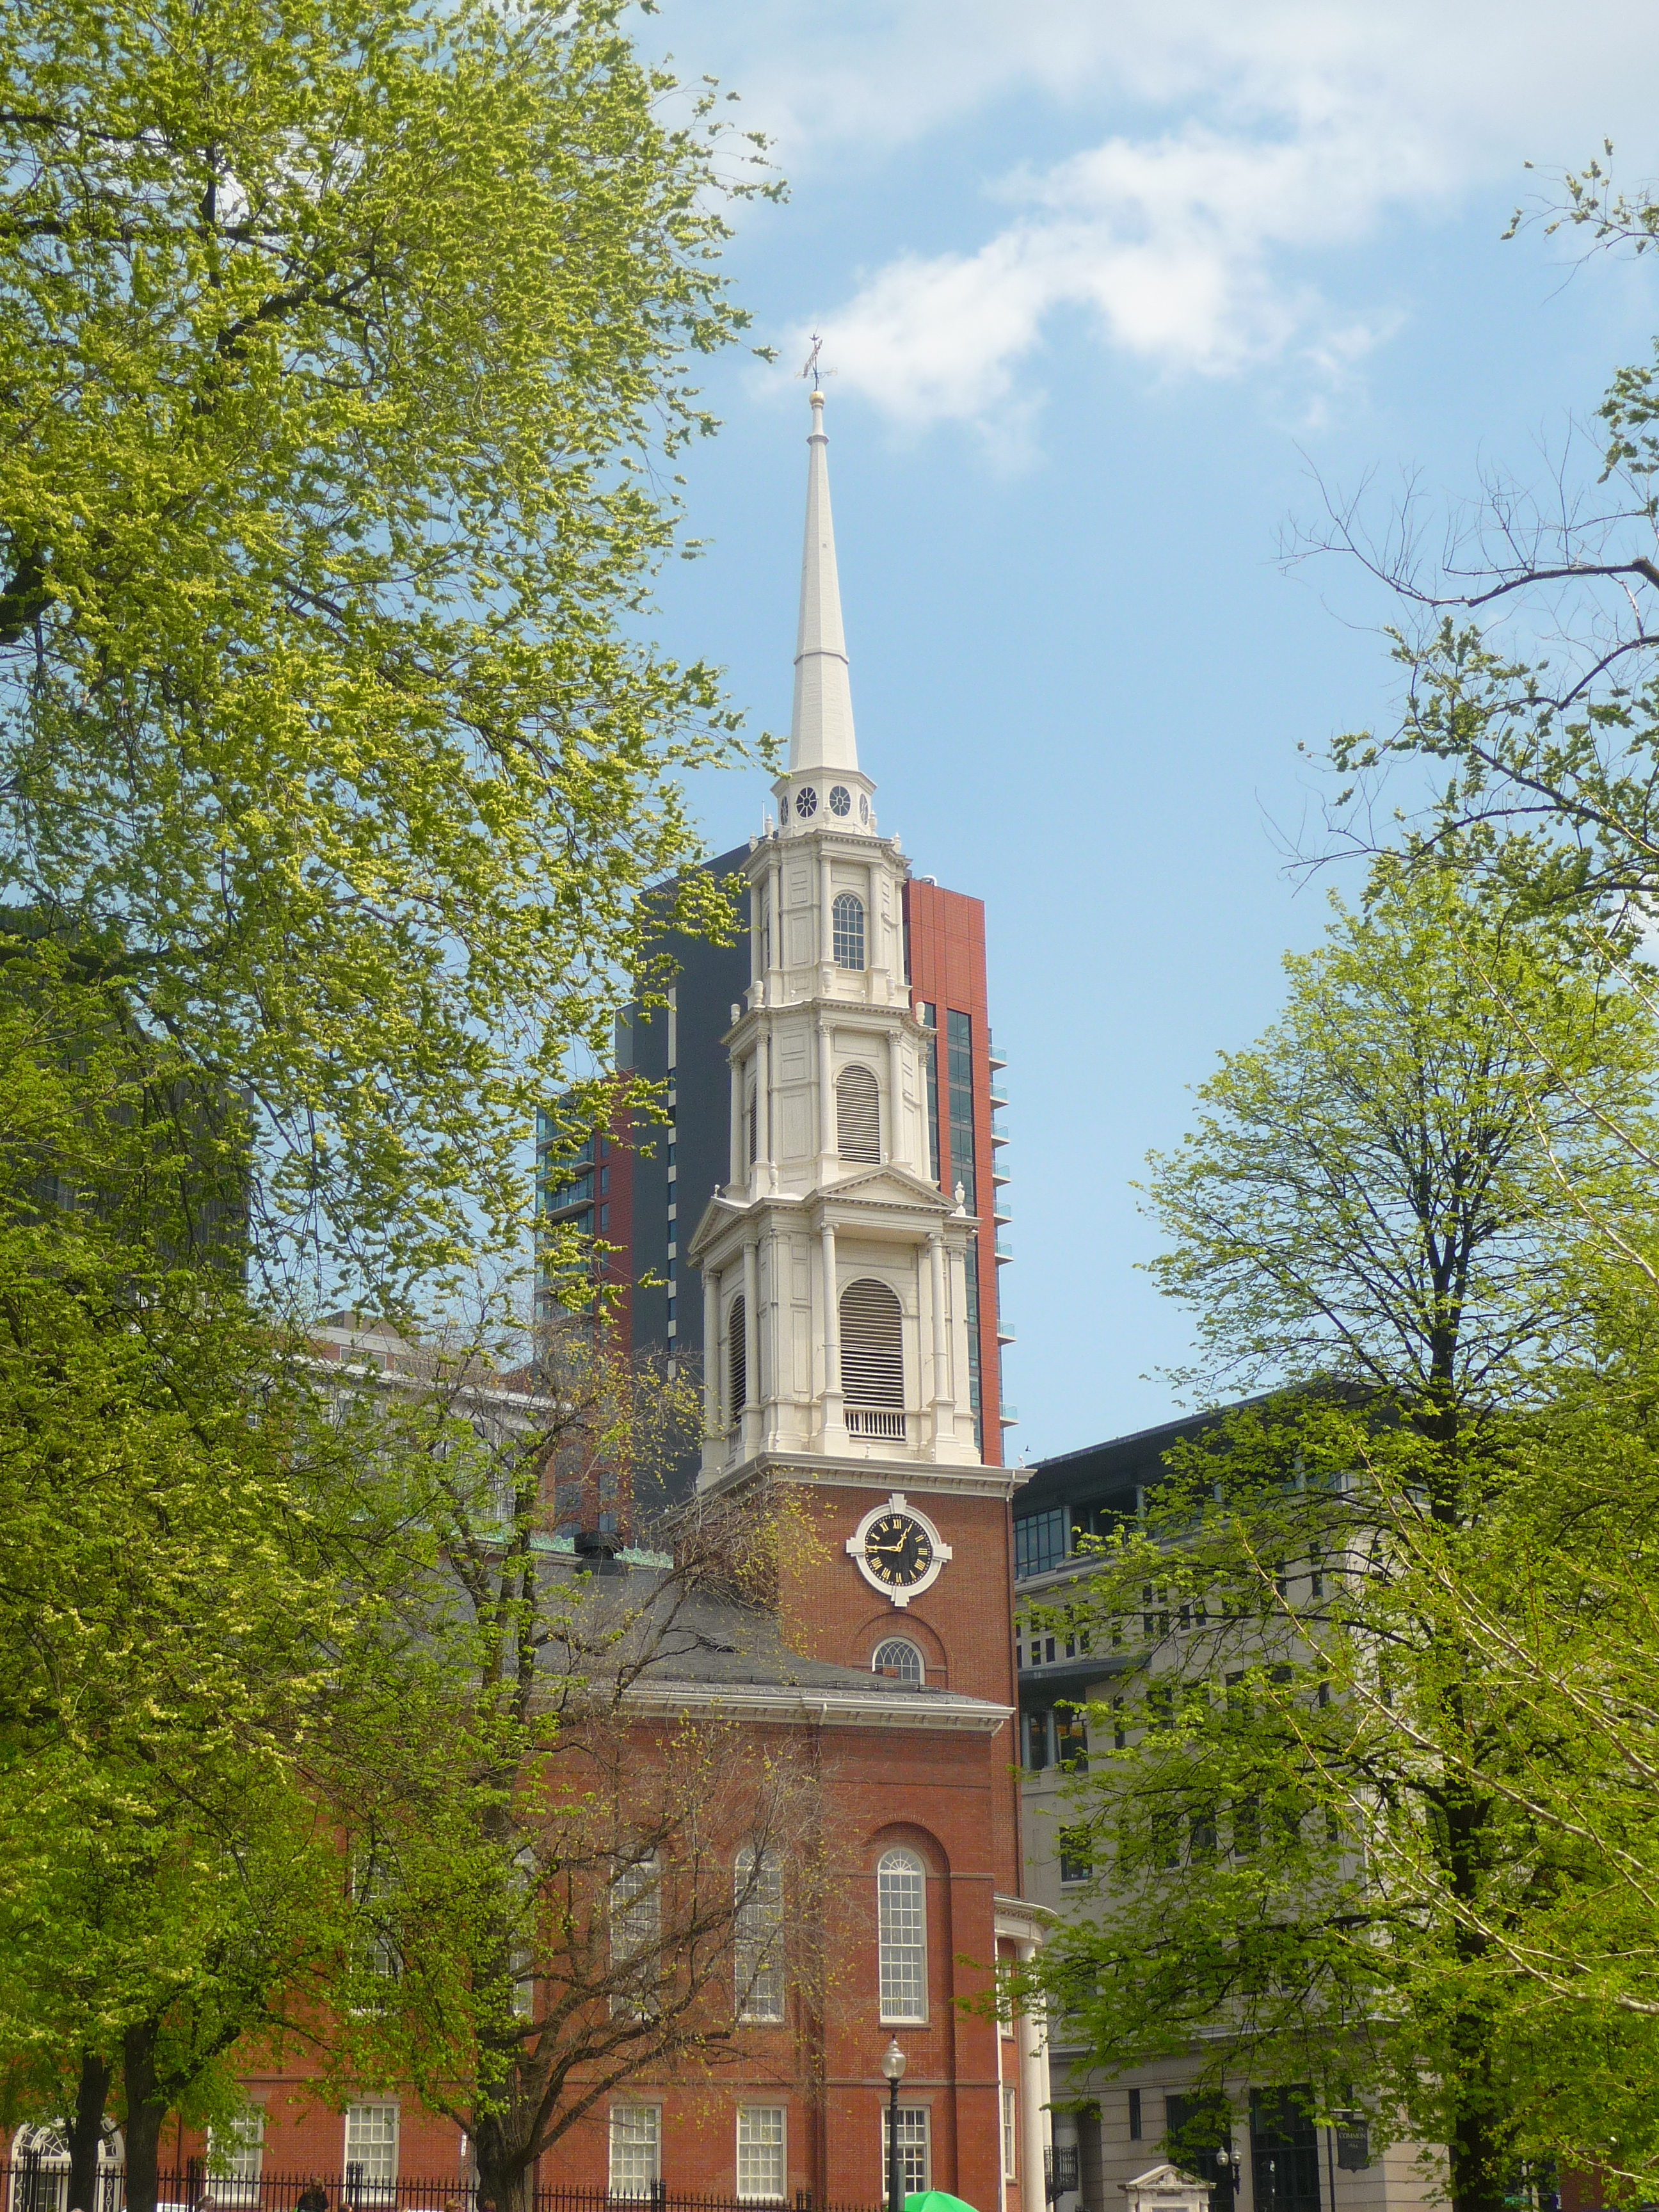 Story of the Steeples in Boston, MA